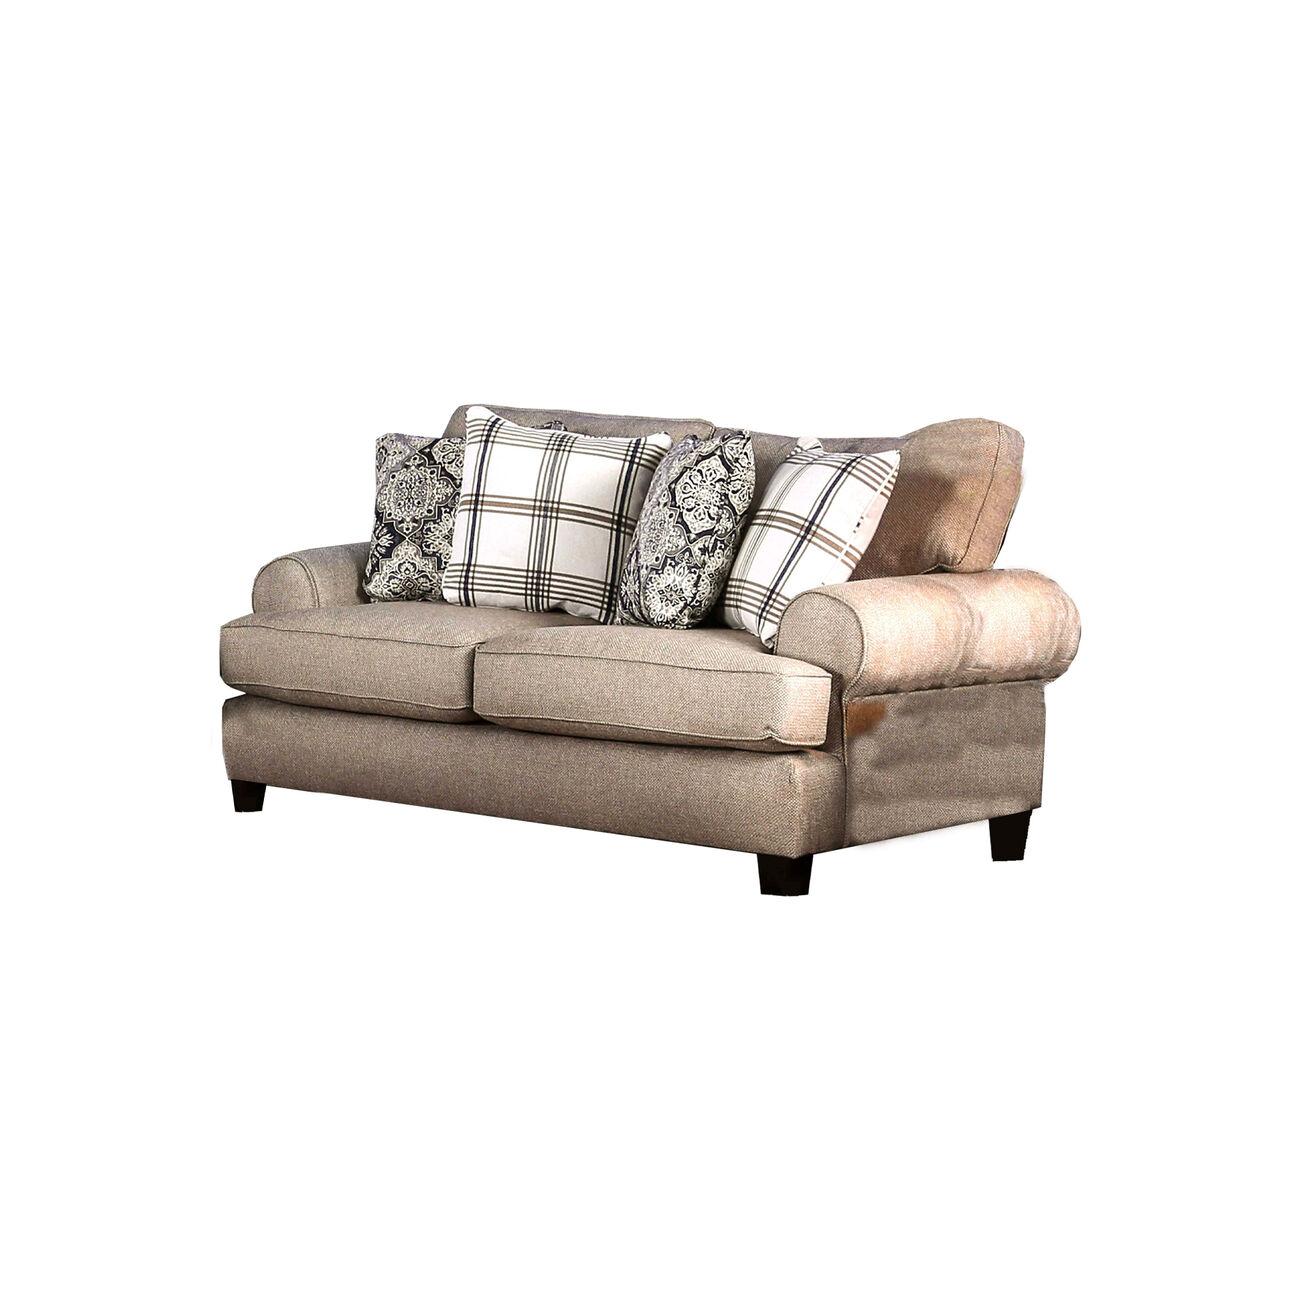 Fabric Upholstered Wooden Loveseat with Rolled Arms, Beige